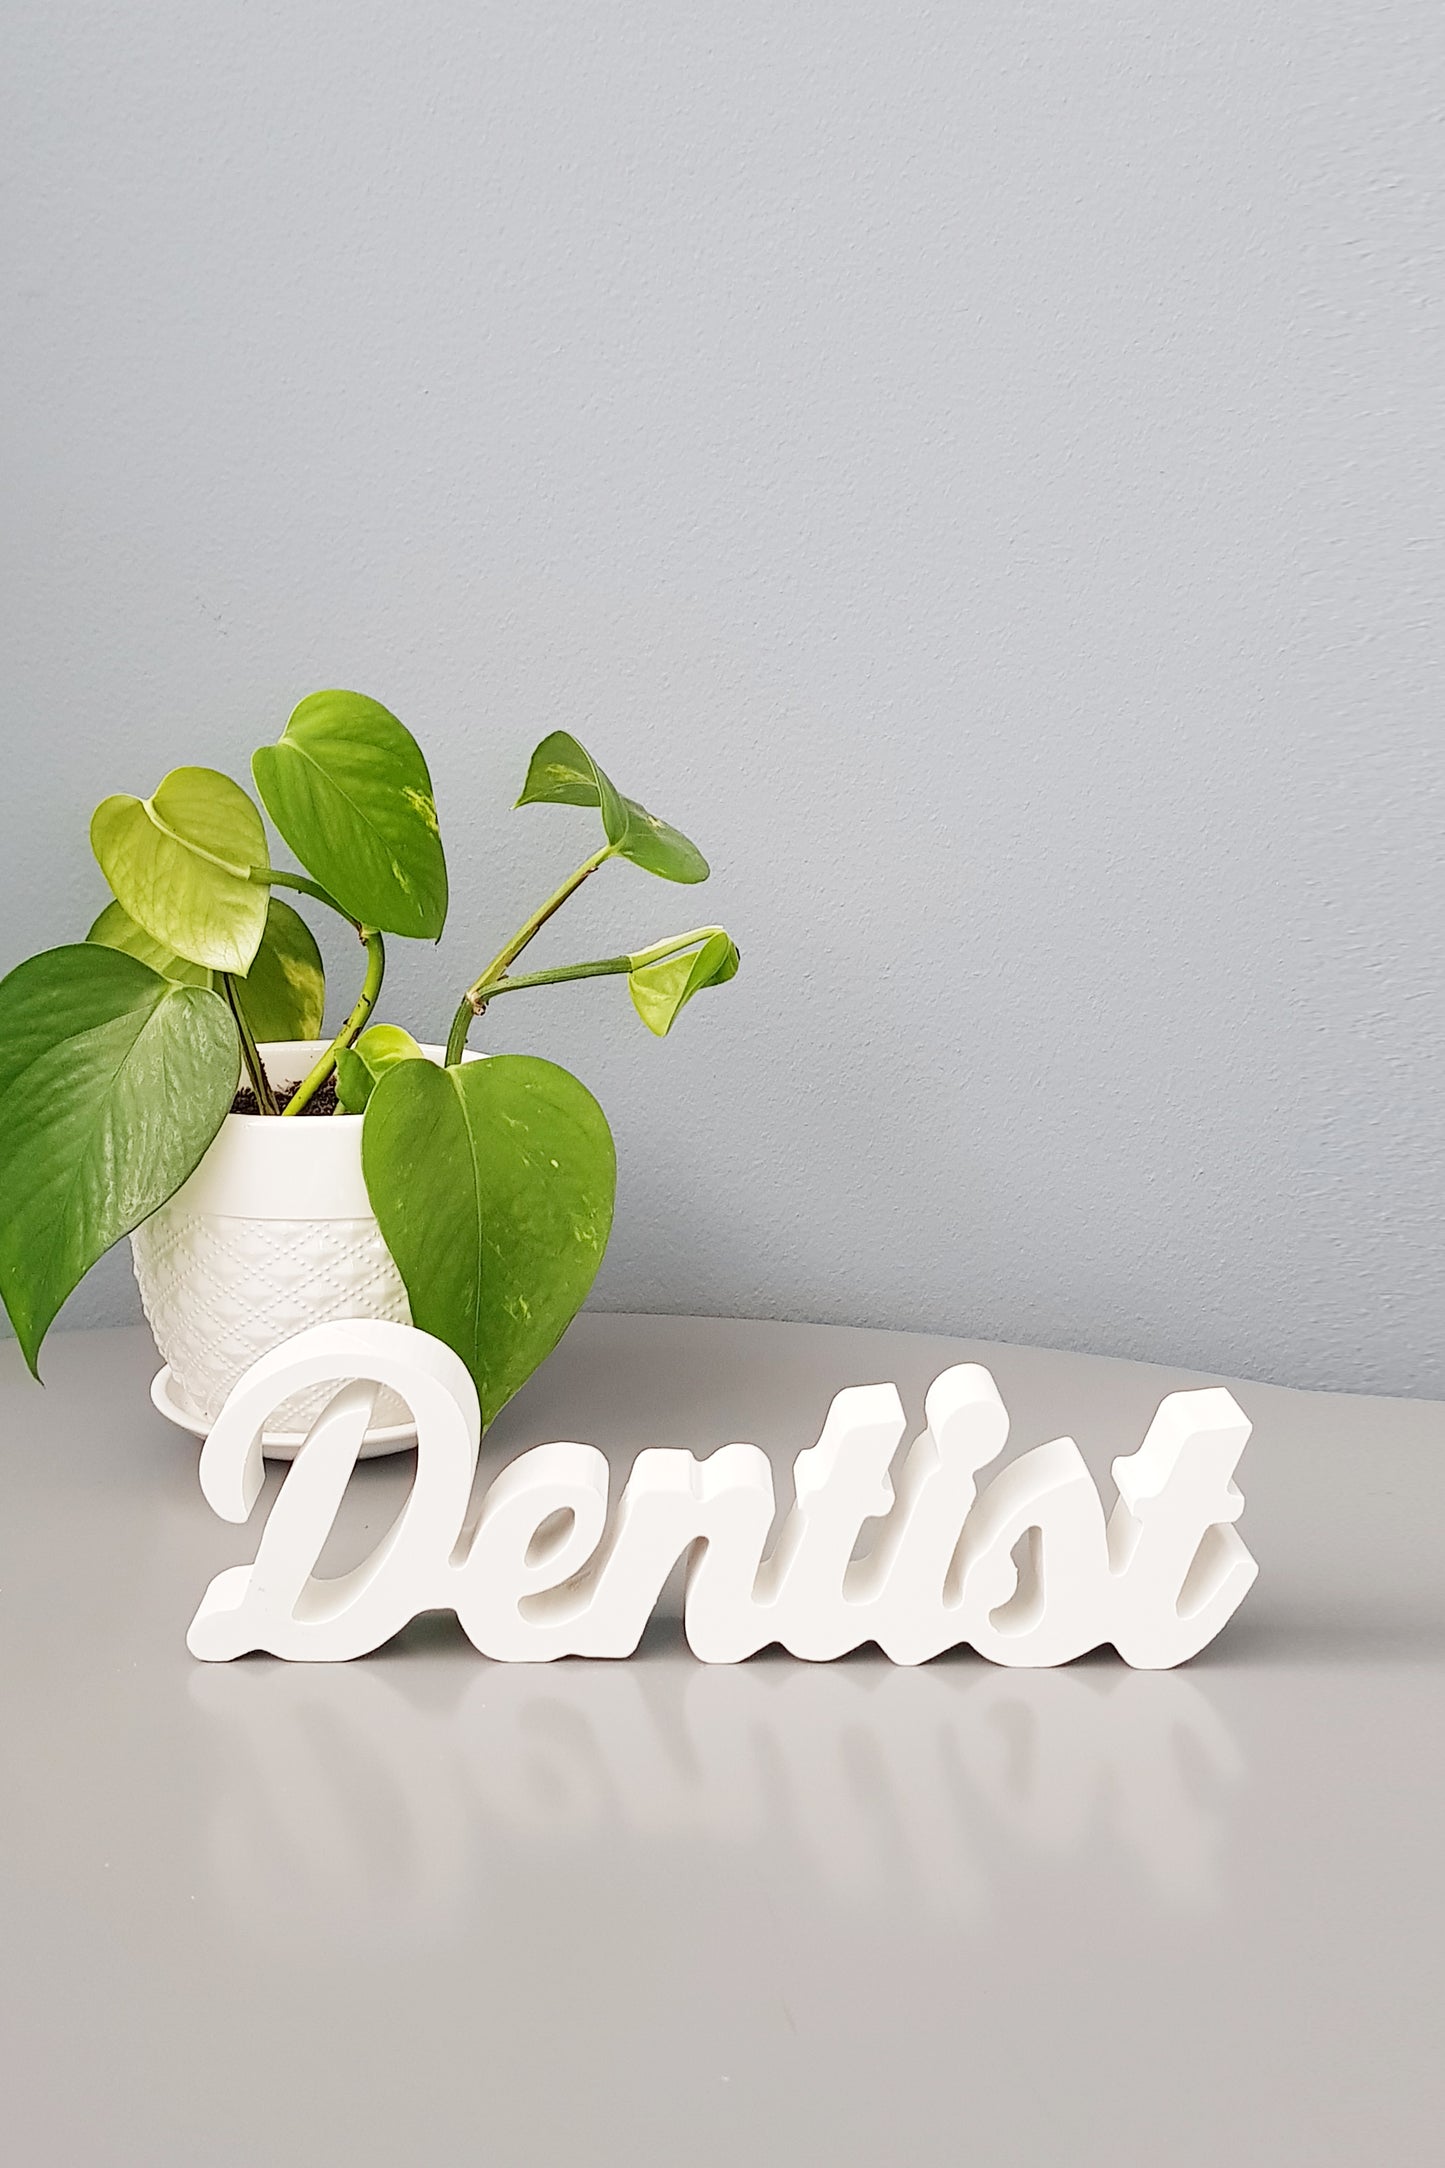 Dentist - Medical Speciality Wooden Office Decoration